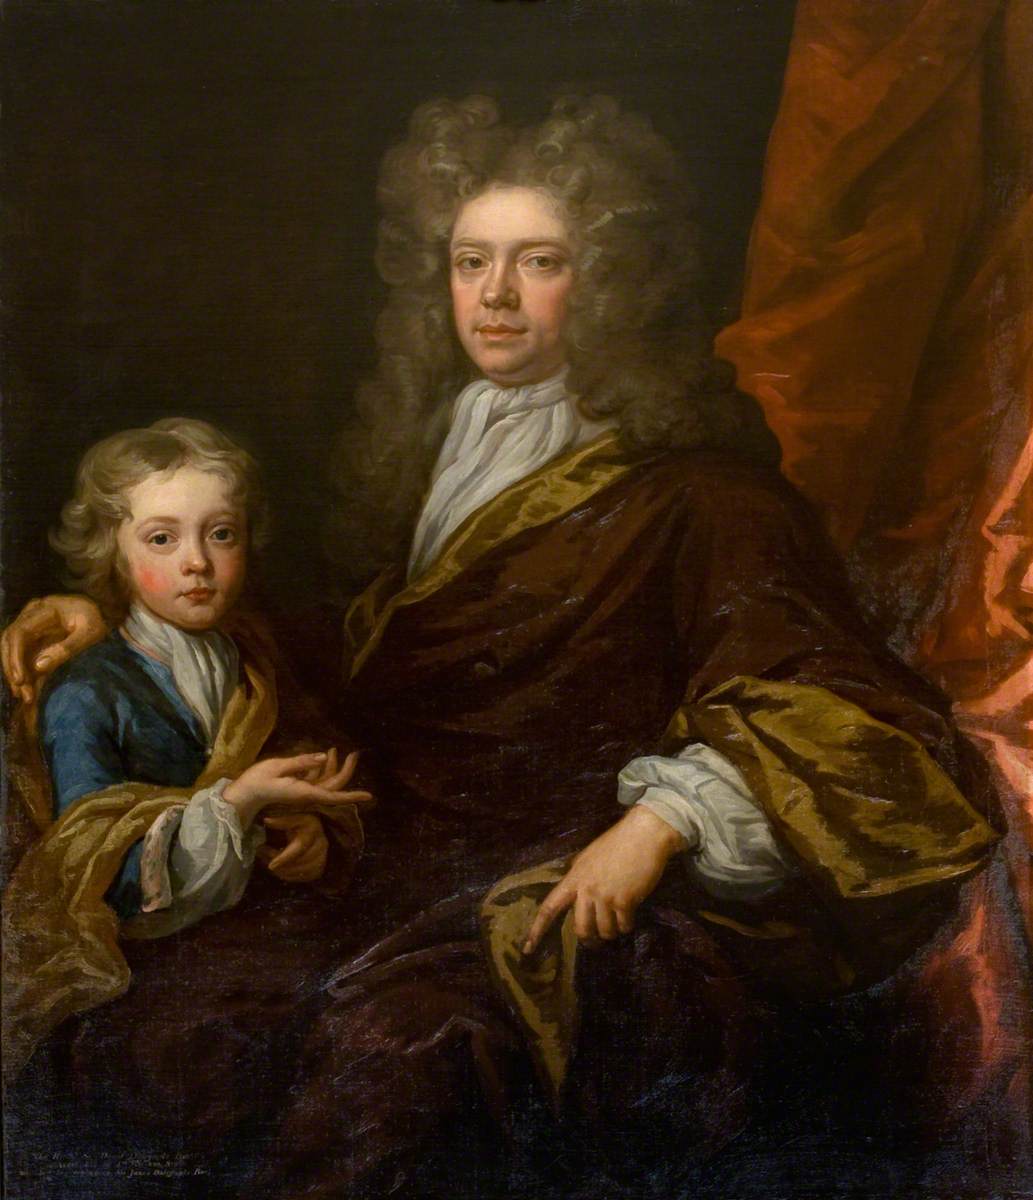 The Honourable Sir David Dalrymple, Bt, Younger Son of 1st Viscount Stair, and His Son Sir James Dalrymple, Bt